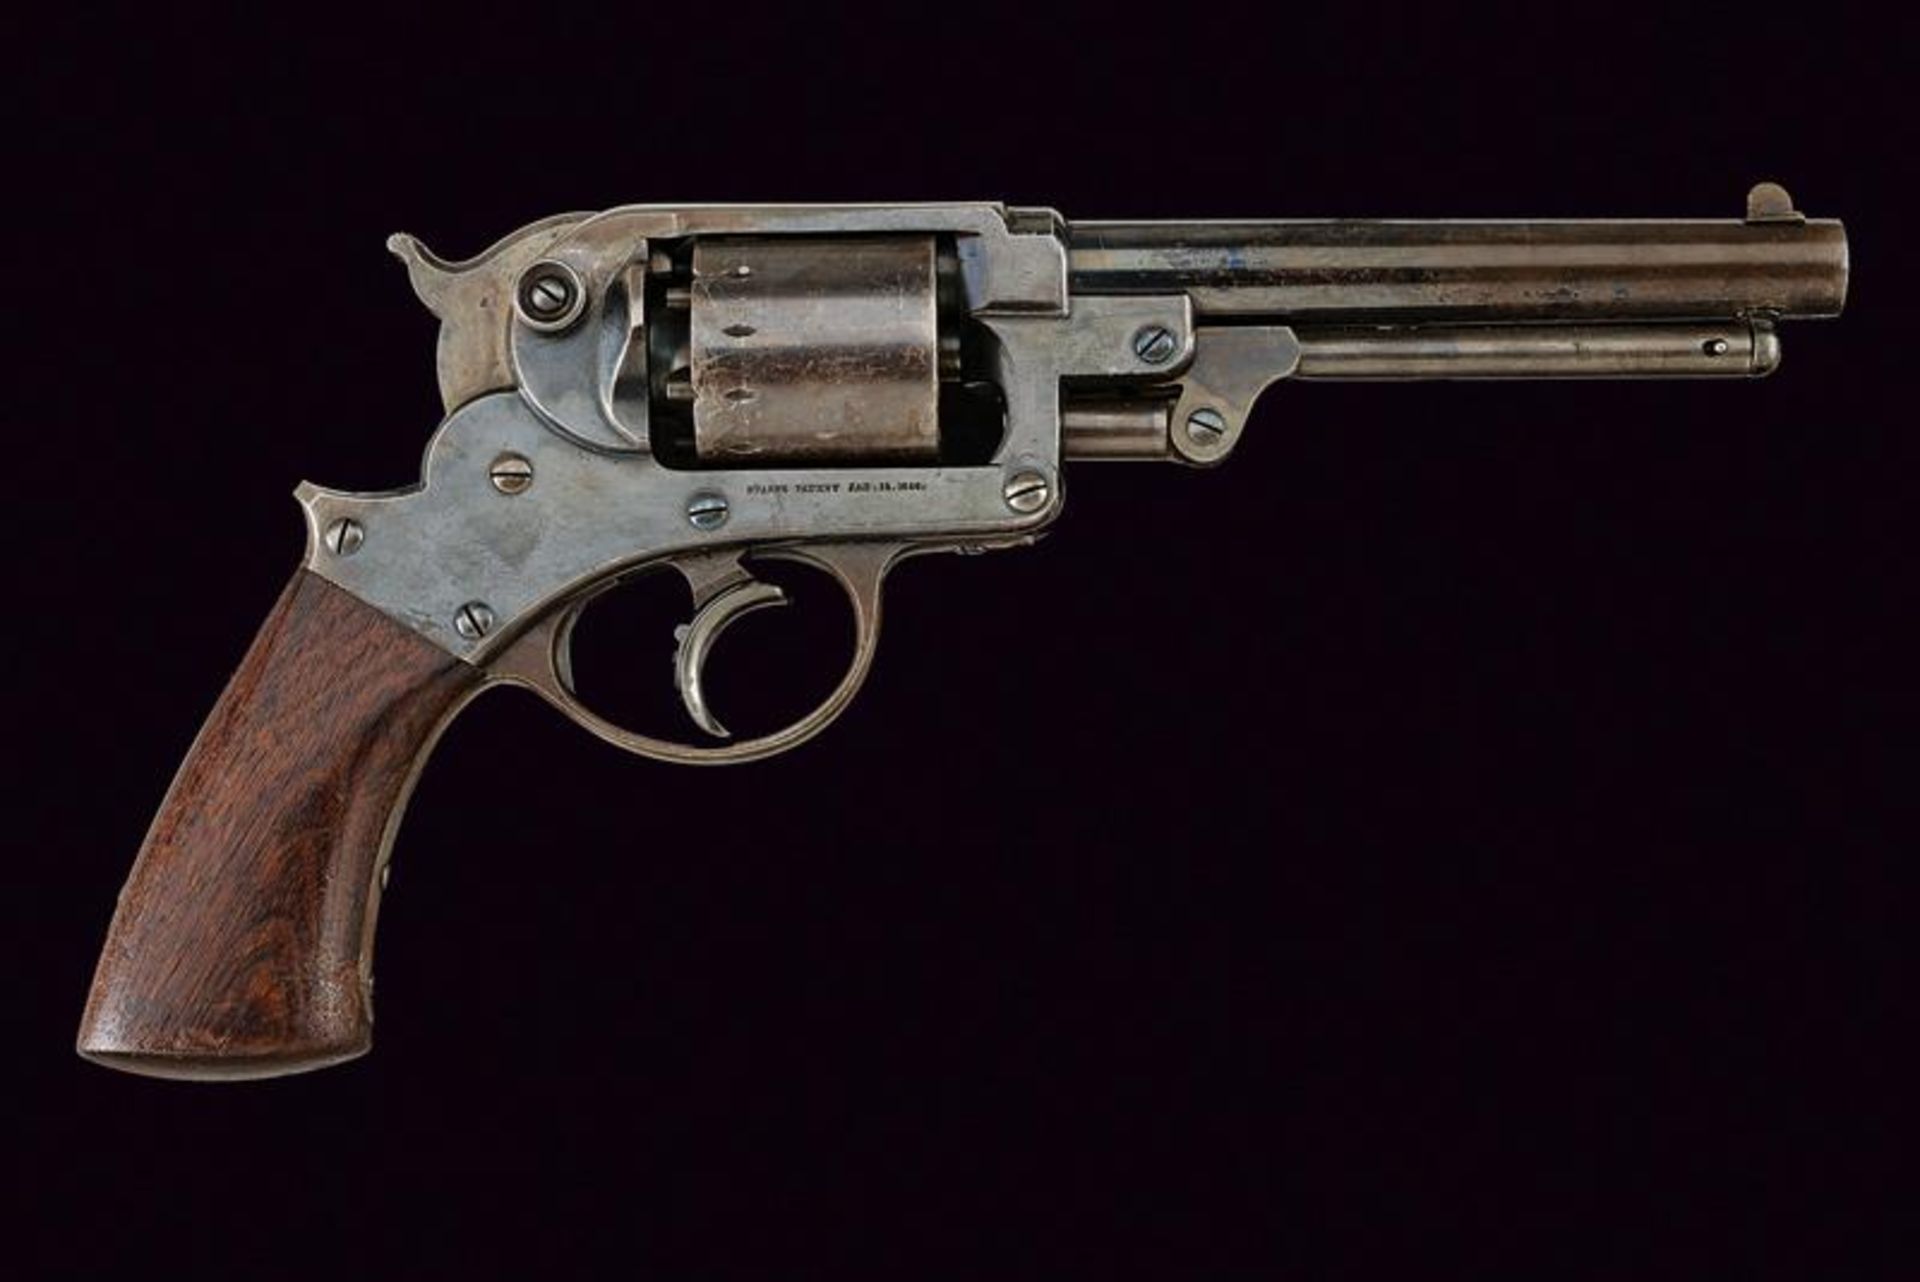 A Starr Arms Co. D.A. 1858 Army Revolver - Image 5 of 5